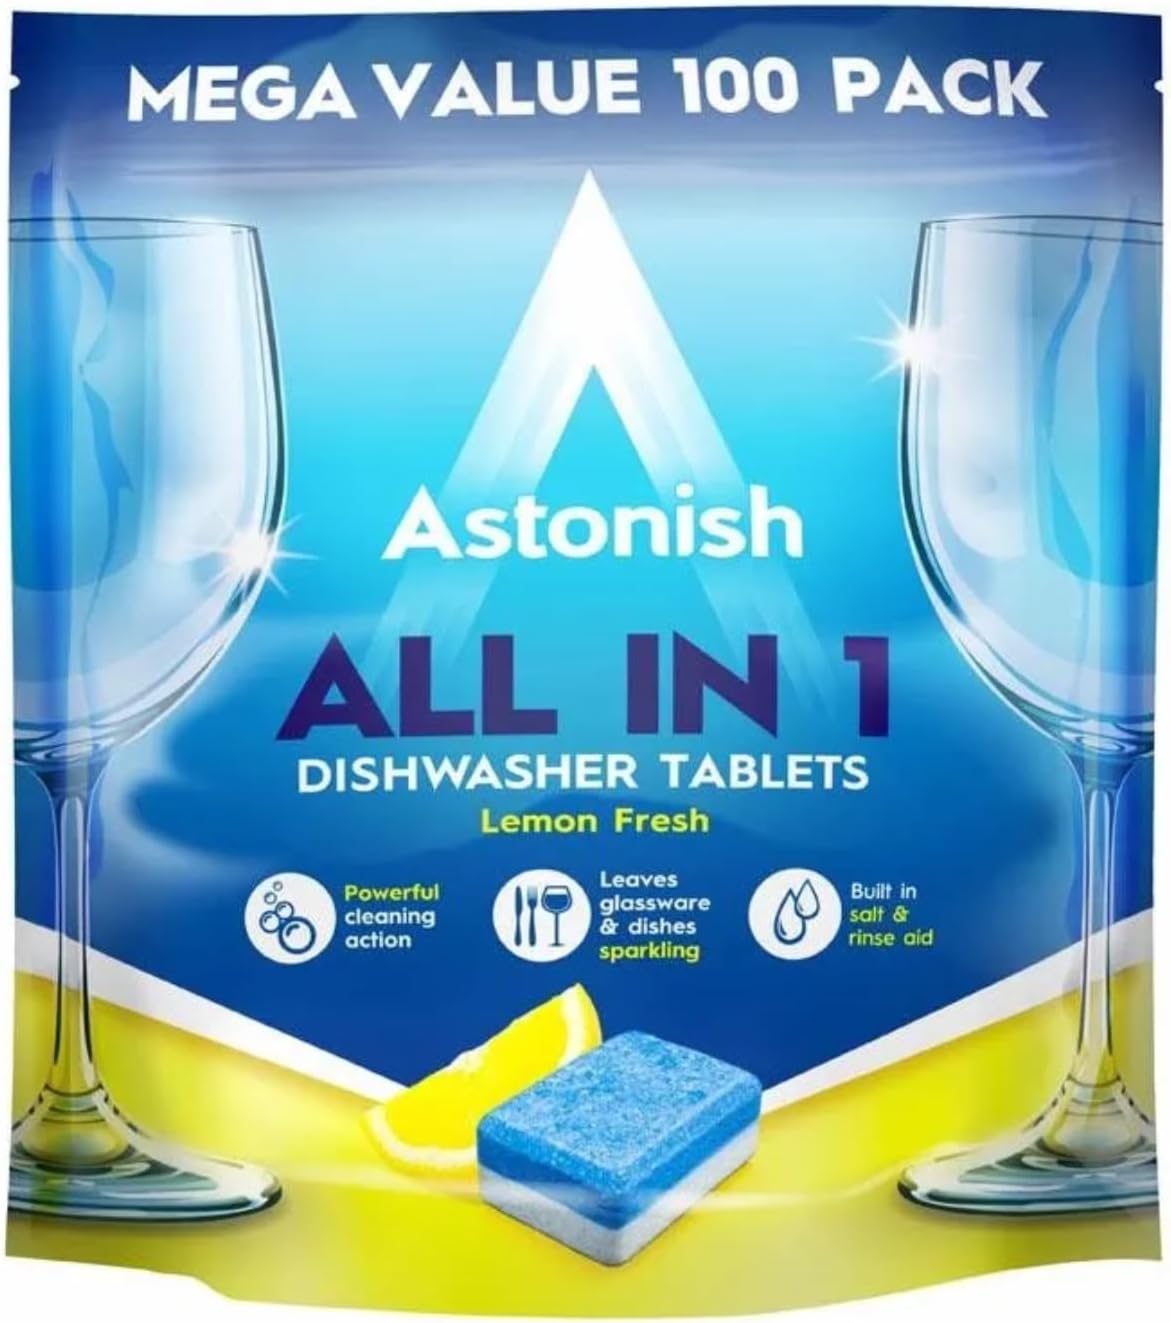 Astonish All In 1 Dishwasher Tablets - Household Cleaner Removes Grease, Grime, & Surface Stains - Dishwasher Soap with Salt & Rinse Aid, Cruelty Free Dishwasher Detergent, Lemon Fresh, 100 Pack